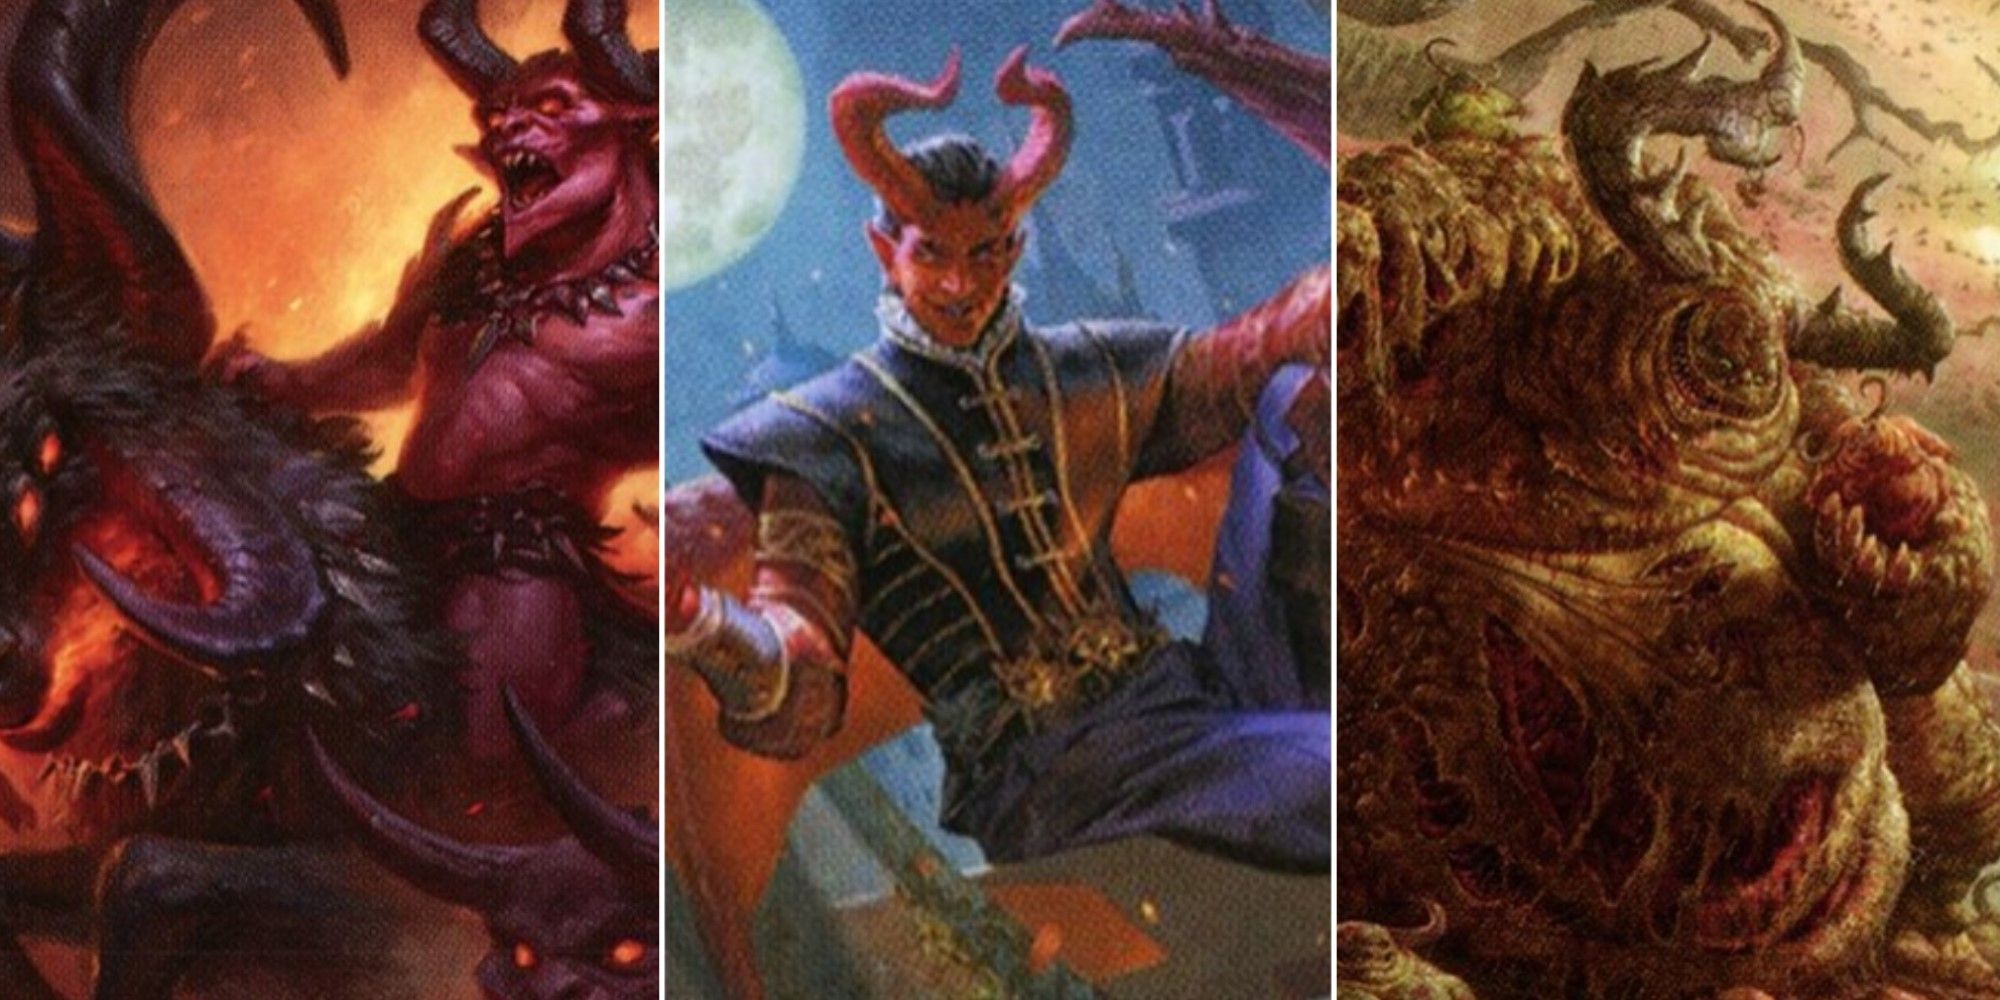 Artwork from Raphael, Fiendish Savior and two other Magic: The Gathering cards.